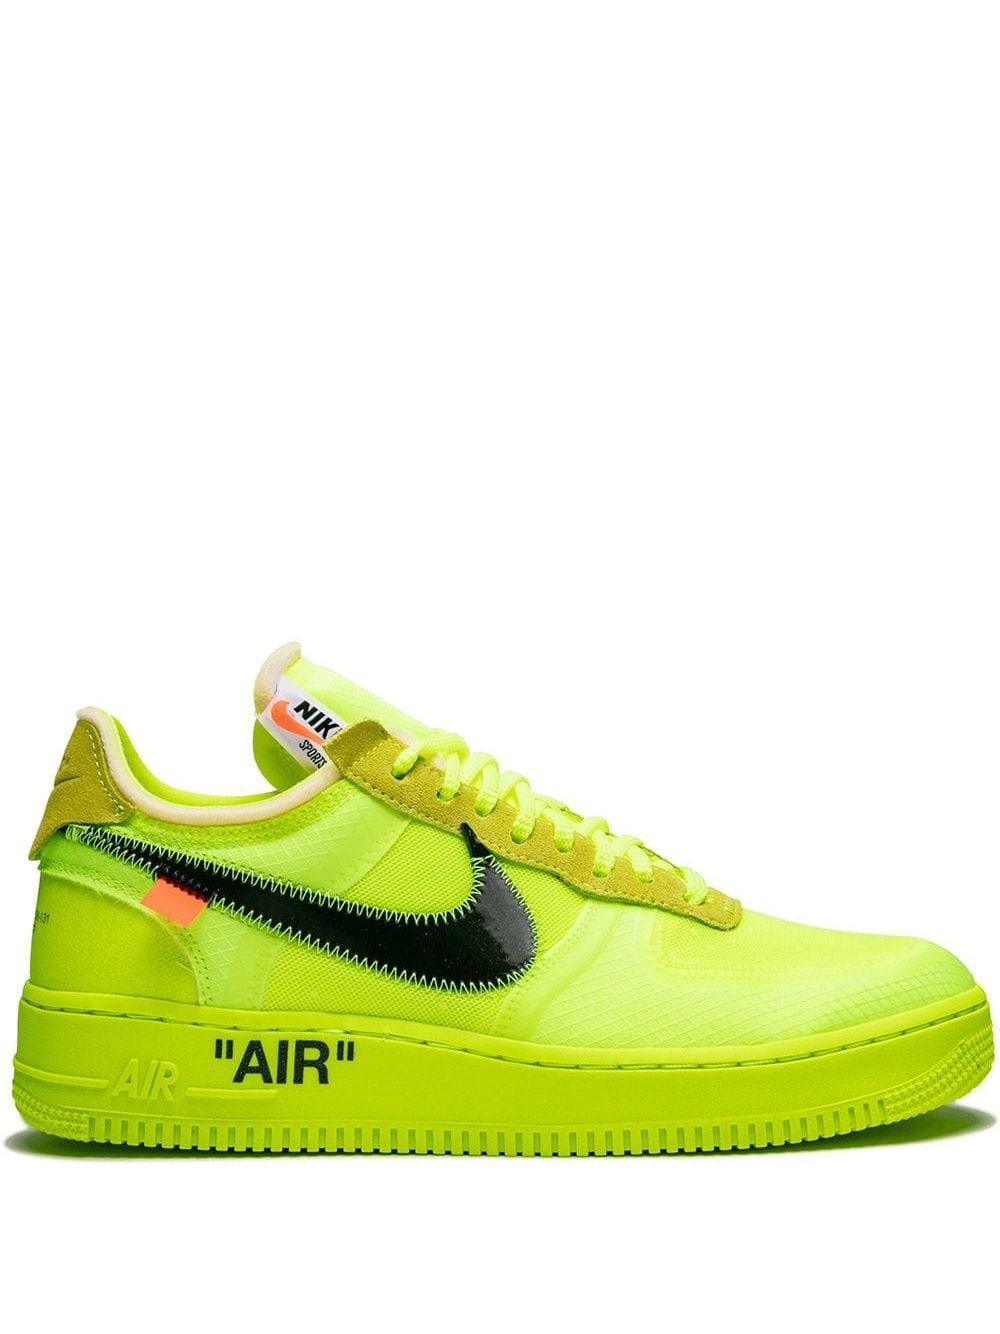 off white air max yellow